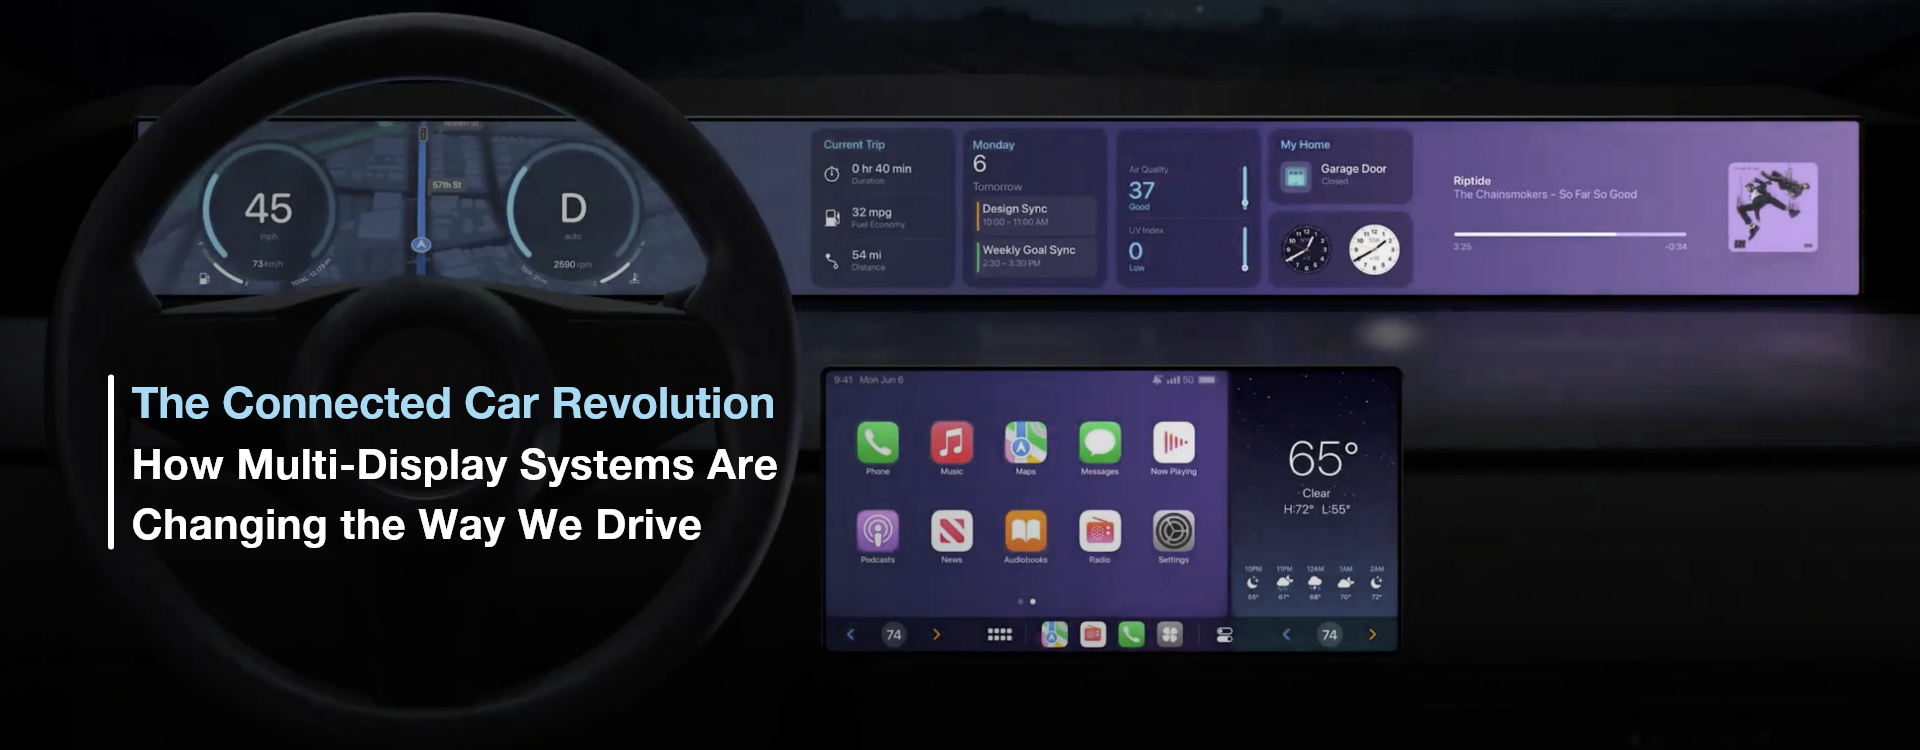 The Connected Car Revolution: How Multi-Display Systems Are Changing the Way We Drive